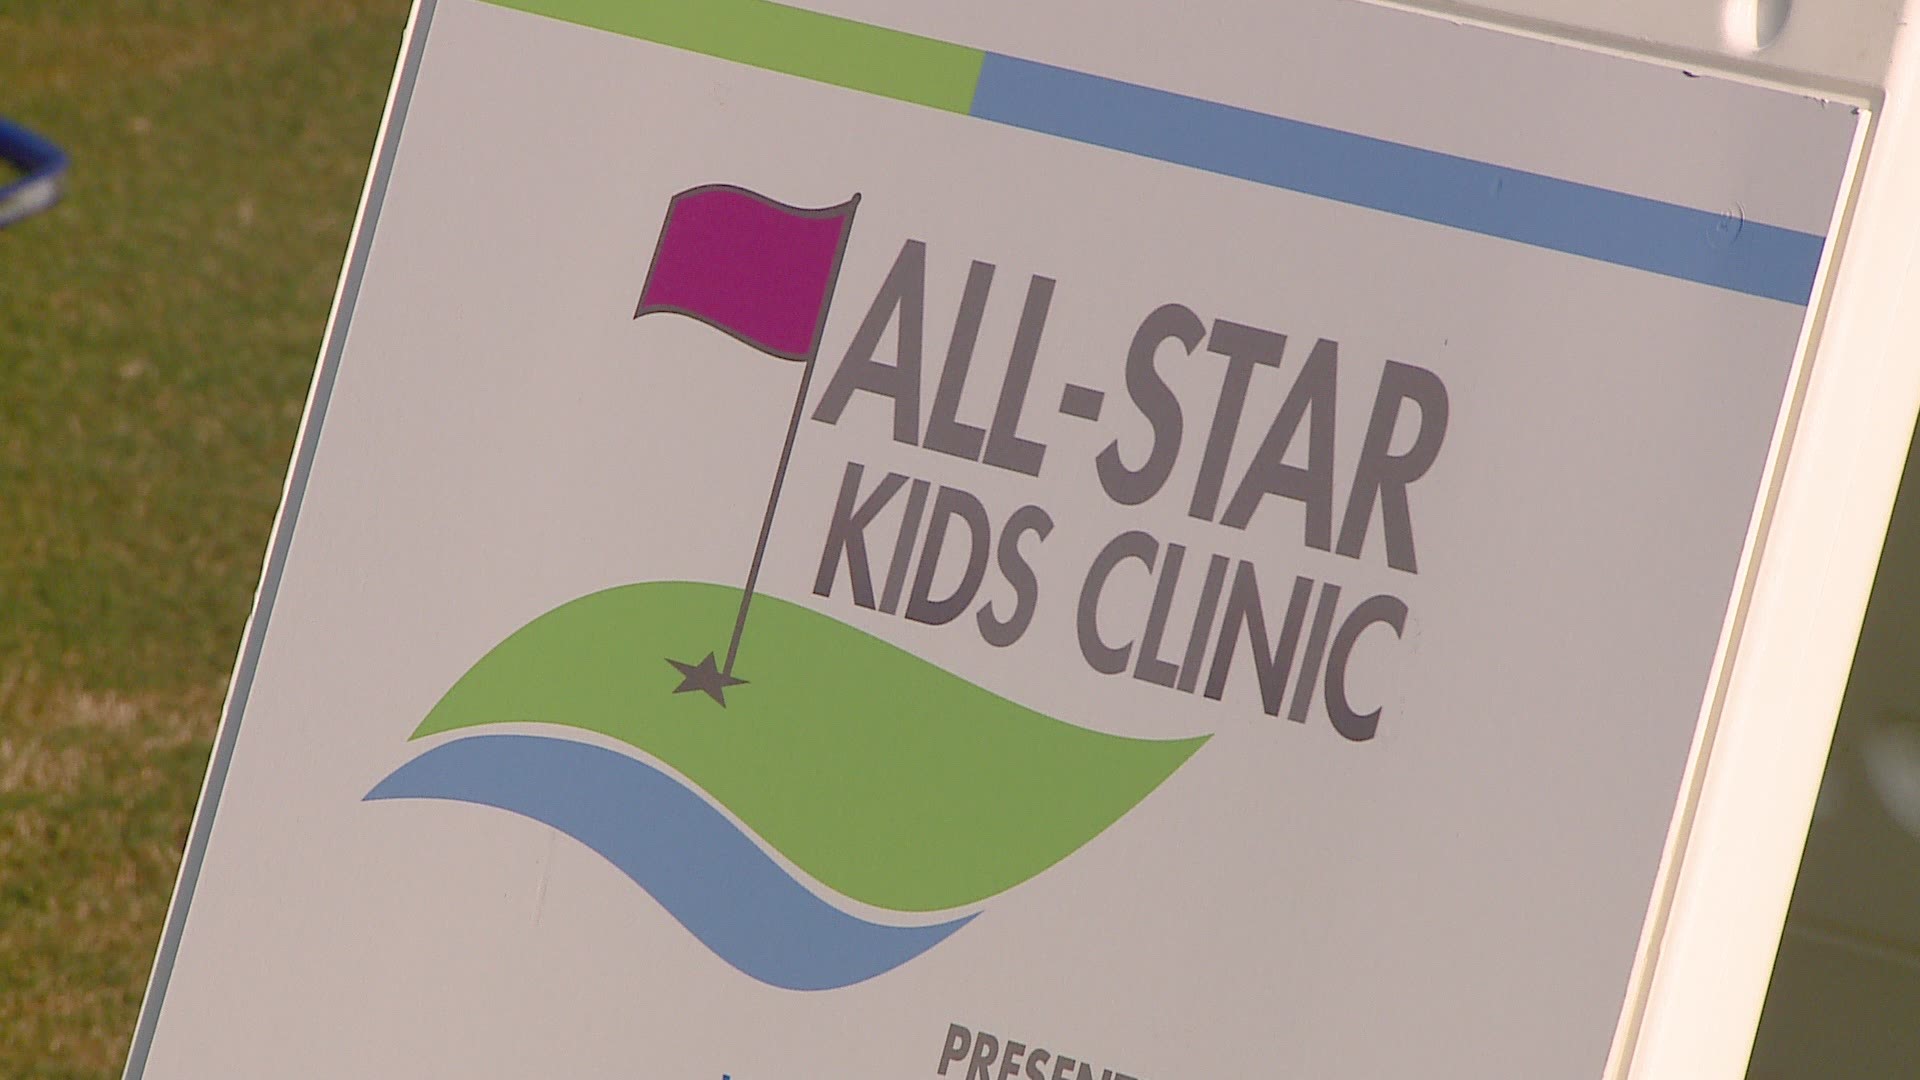 The Clinic Allows Children With Special Needs To Have A Fun Day Learning Golf